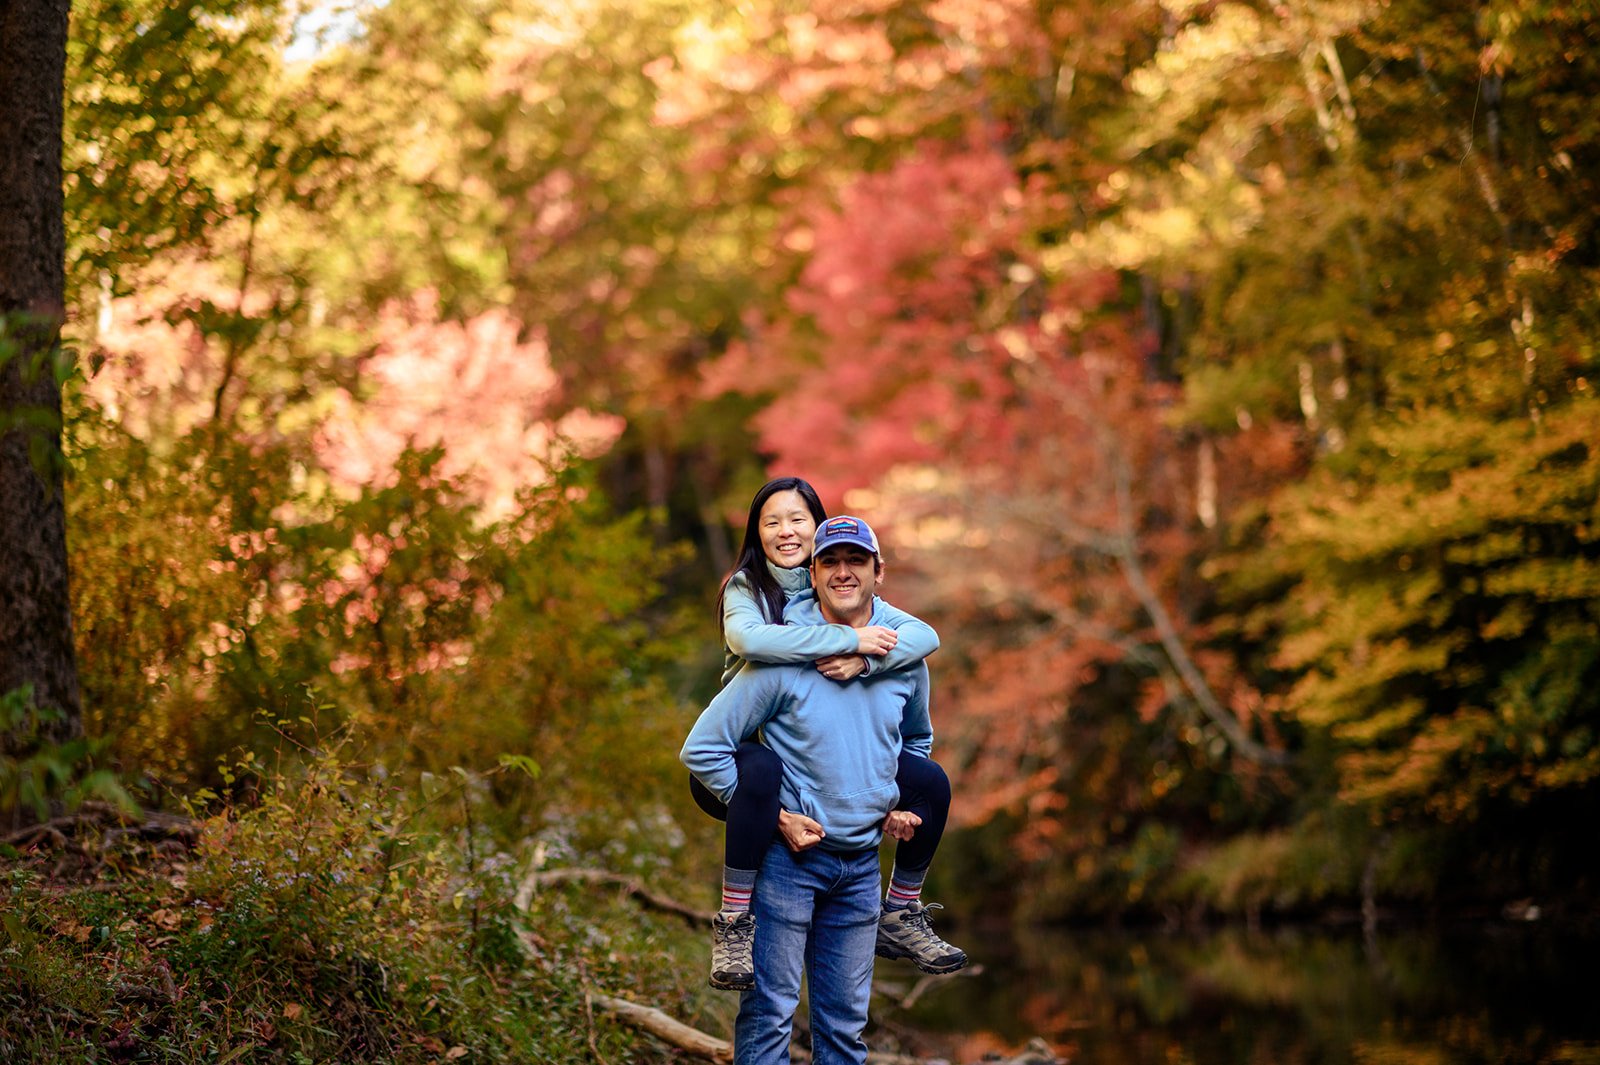 A man giving a piggyback ride to a woman in a forest with colorful autumn foliage near Linville Falls.